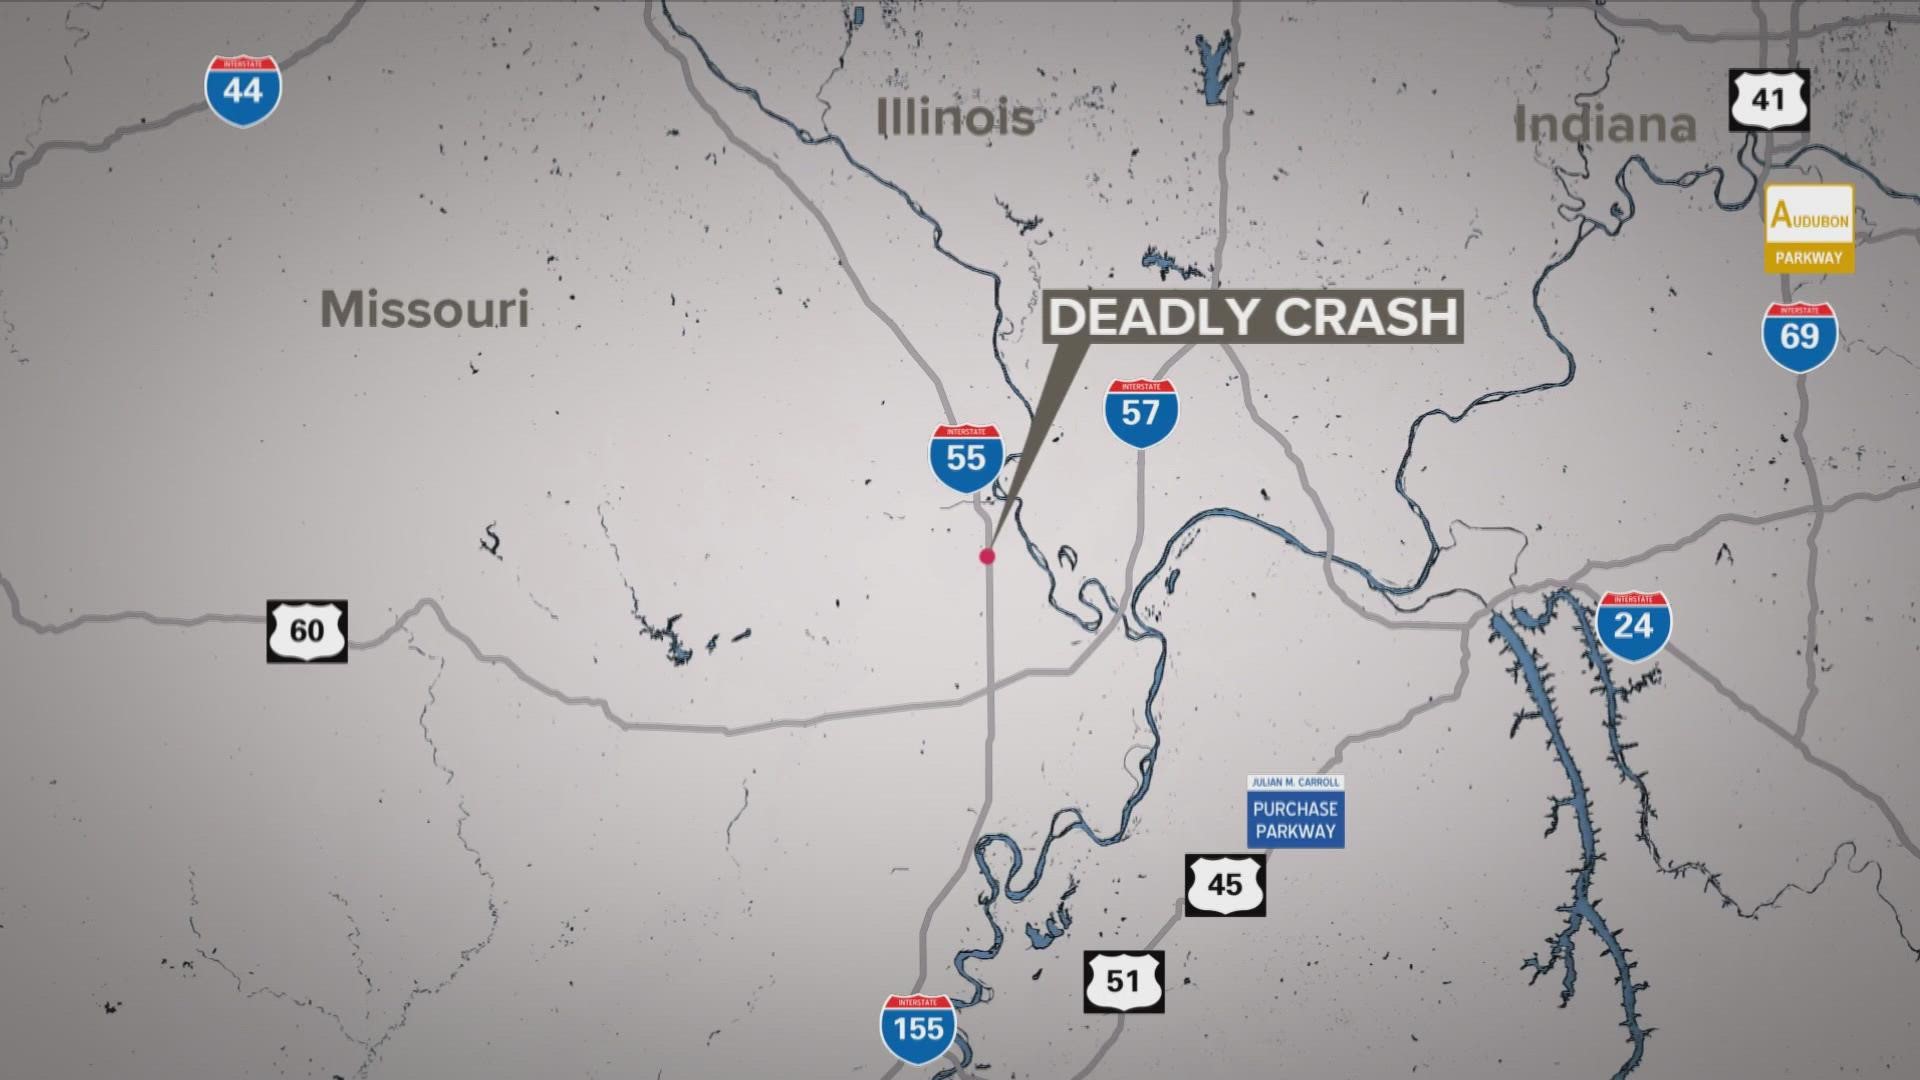 The driver, from Bridgeton, a man from Ste. Genevieve and a woman from Brighton, Illinois were killed in the crash. Three others from the St. Louis area were injured